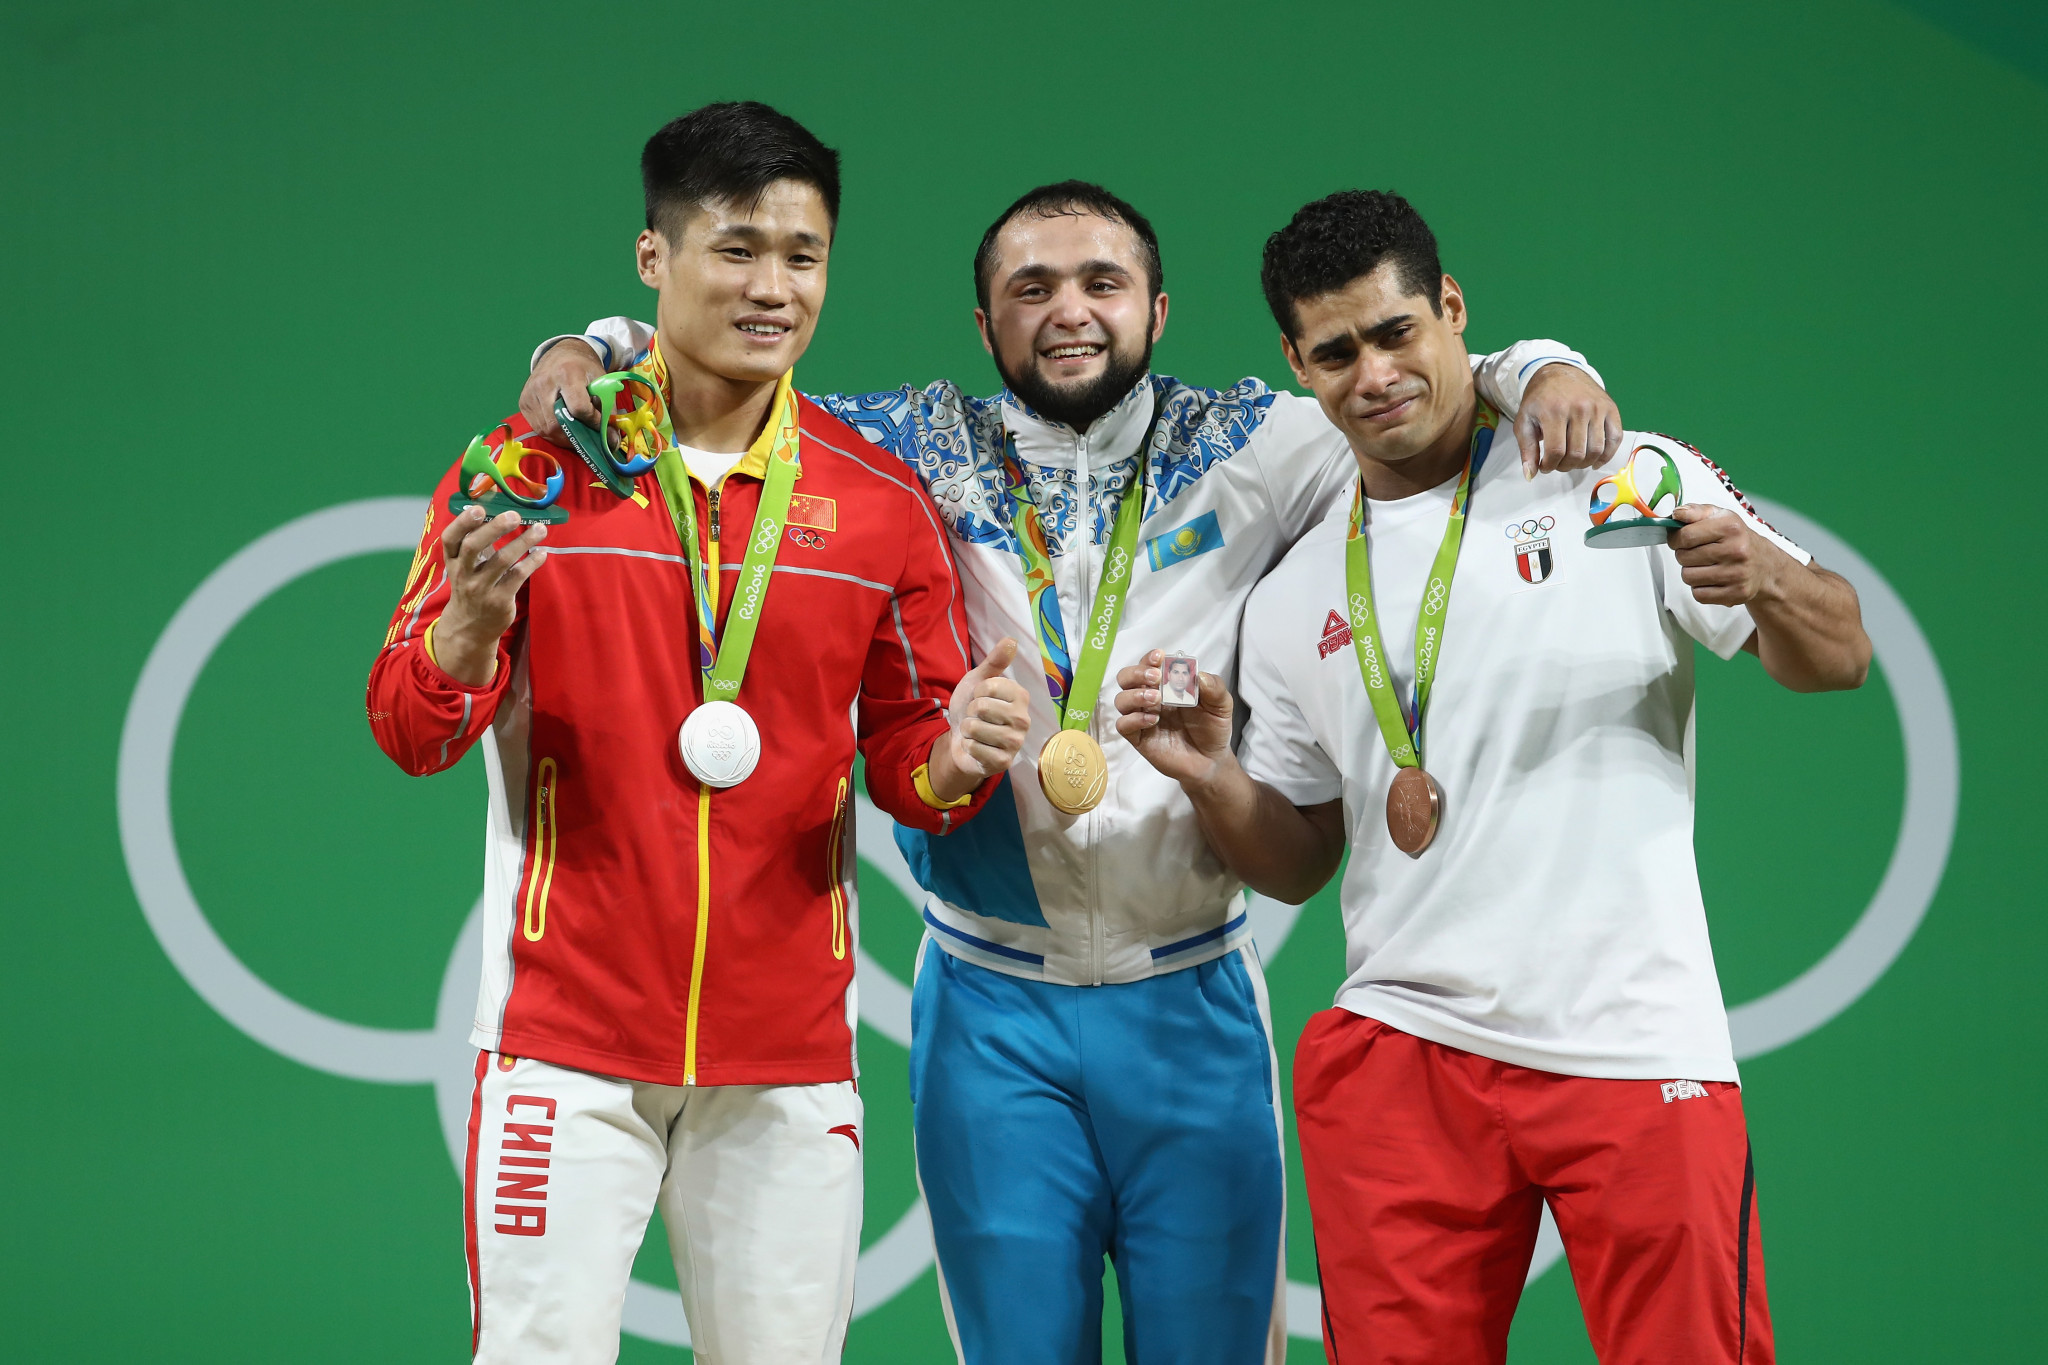 Xiaojun Lyu, Nijat Rahimov and Mohamed Mahmoud on a podium at the Rio 2016 Olympic Games. GETTY IMAGES.